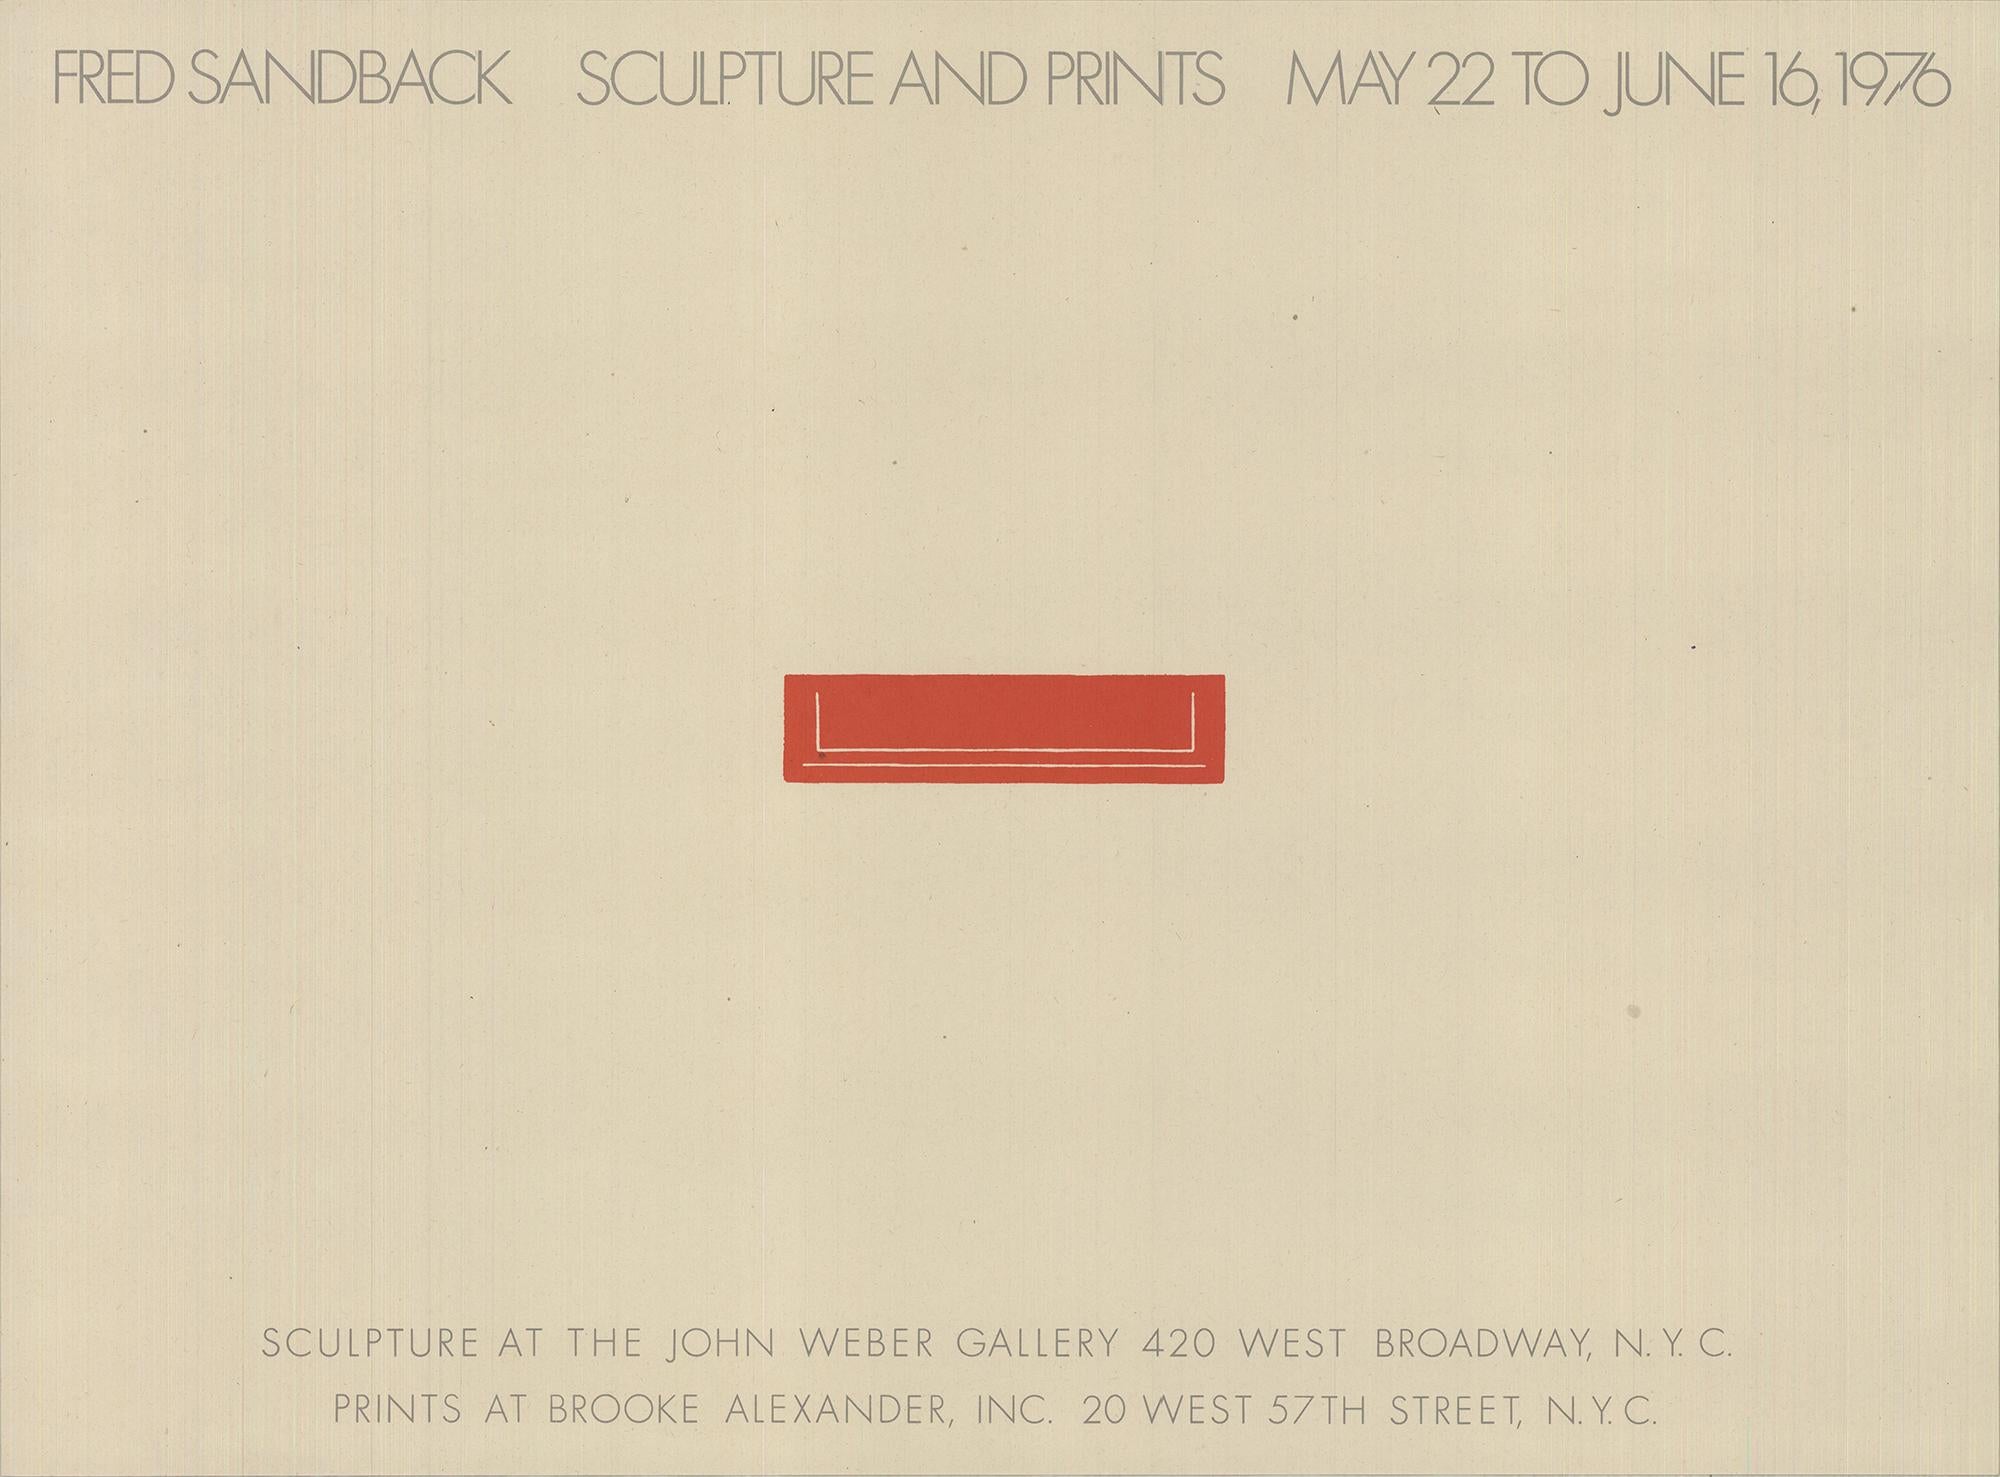 Exhibition poster/ Mailer for a Fred Sandback exhibition held at Brook Alexander, Inc. and The John Weber Gallery in 1976.